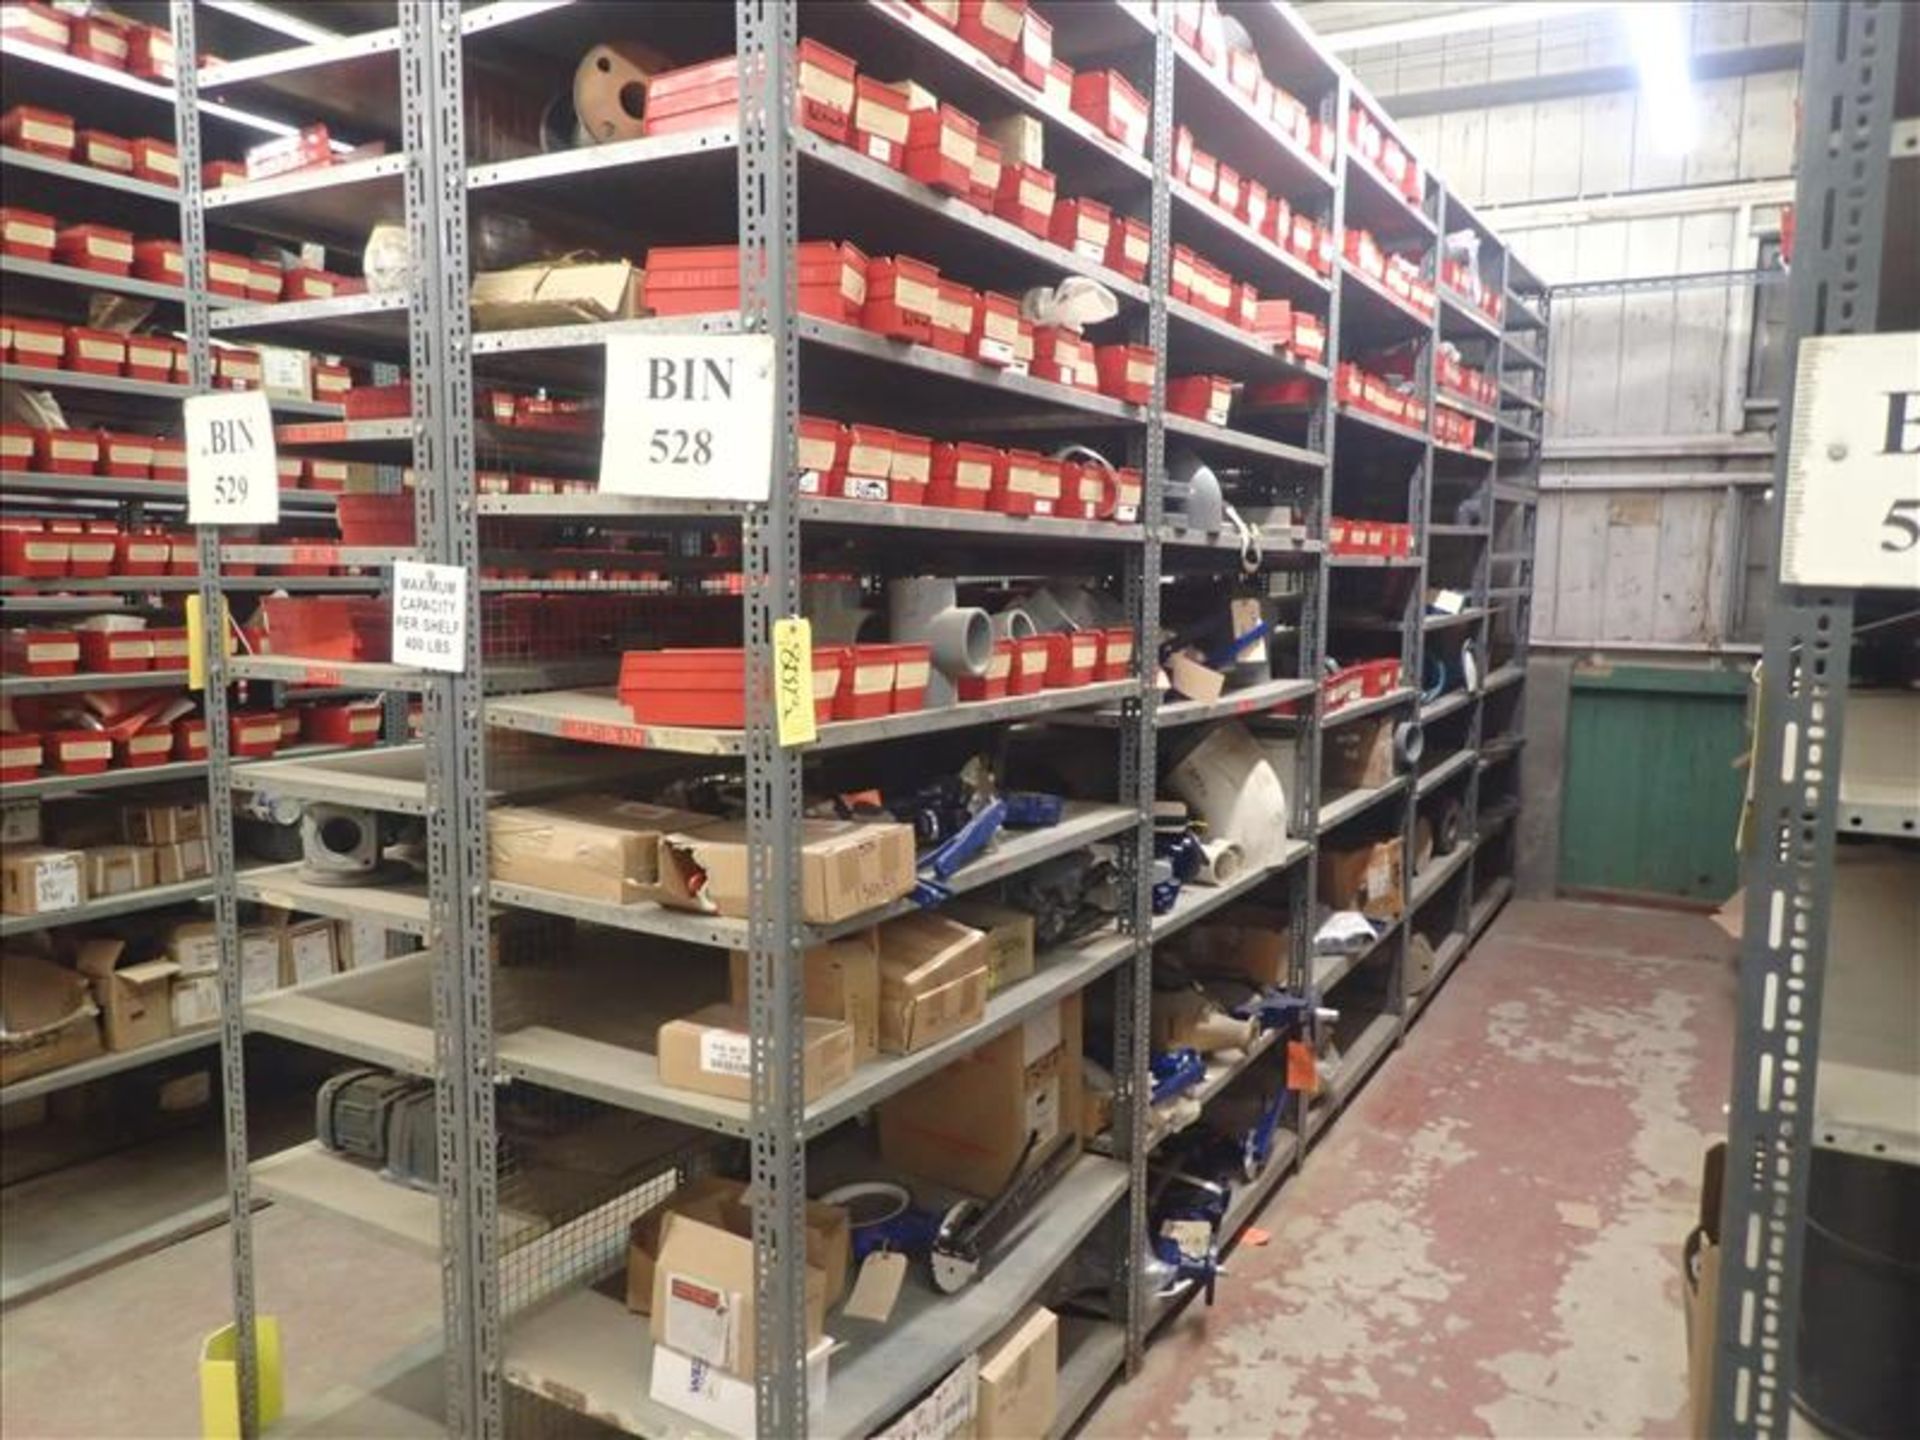 contents of shelving: piping, valves, spare parts, etc. (Bin 528) (Tag 8023 Loc WH South)